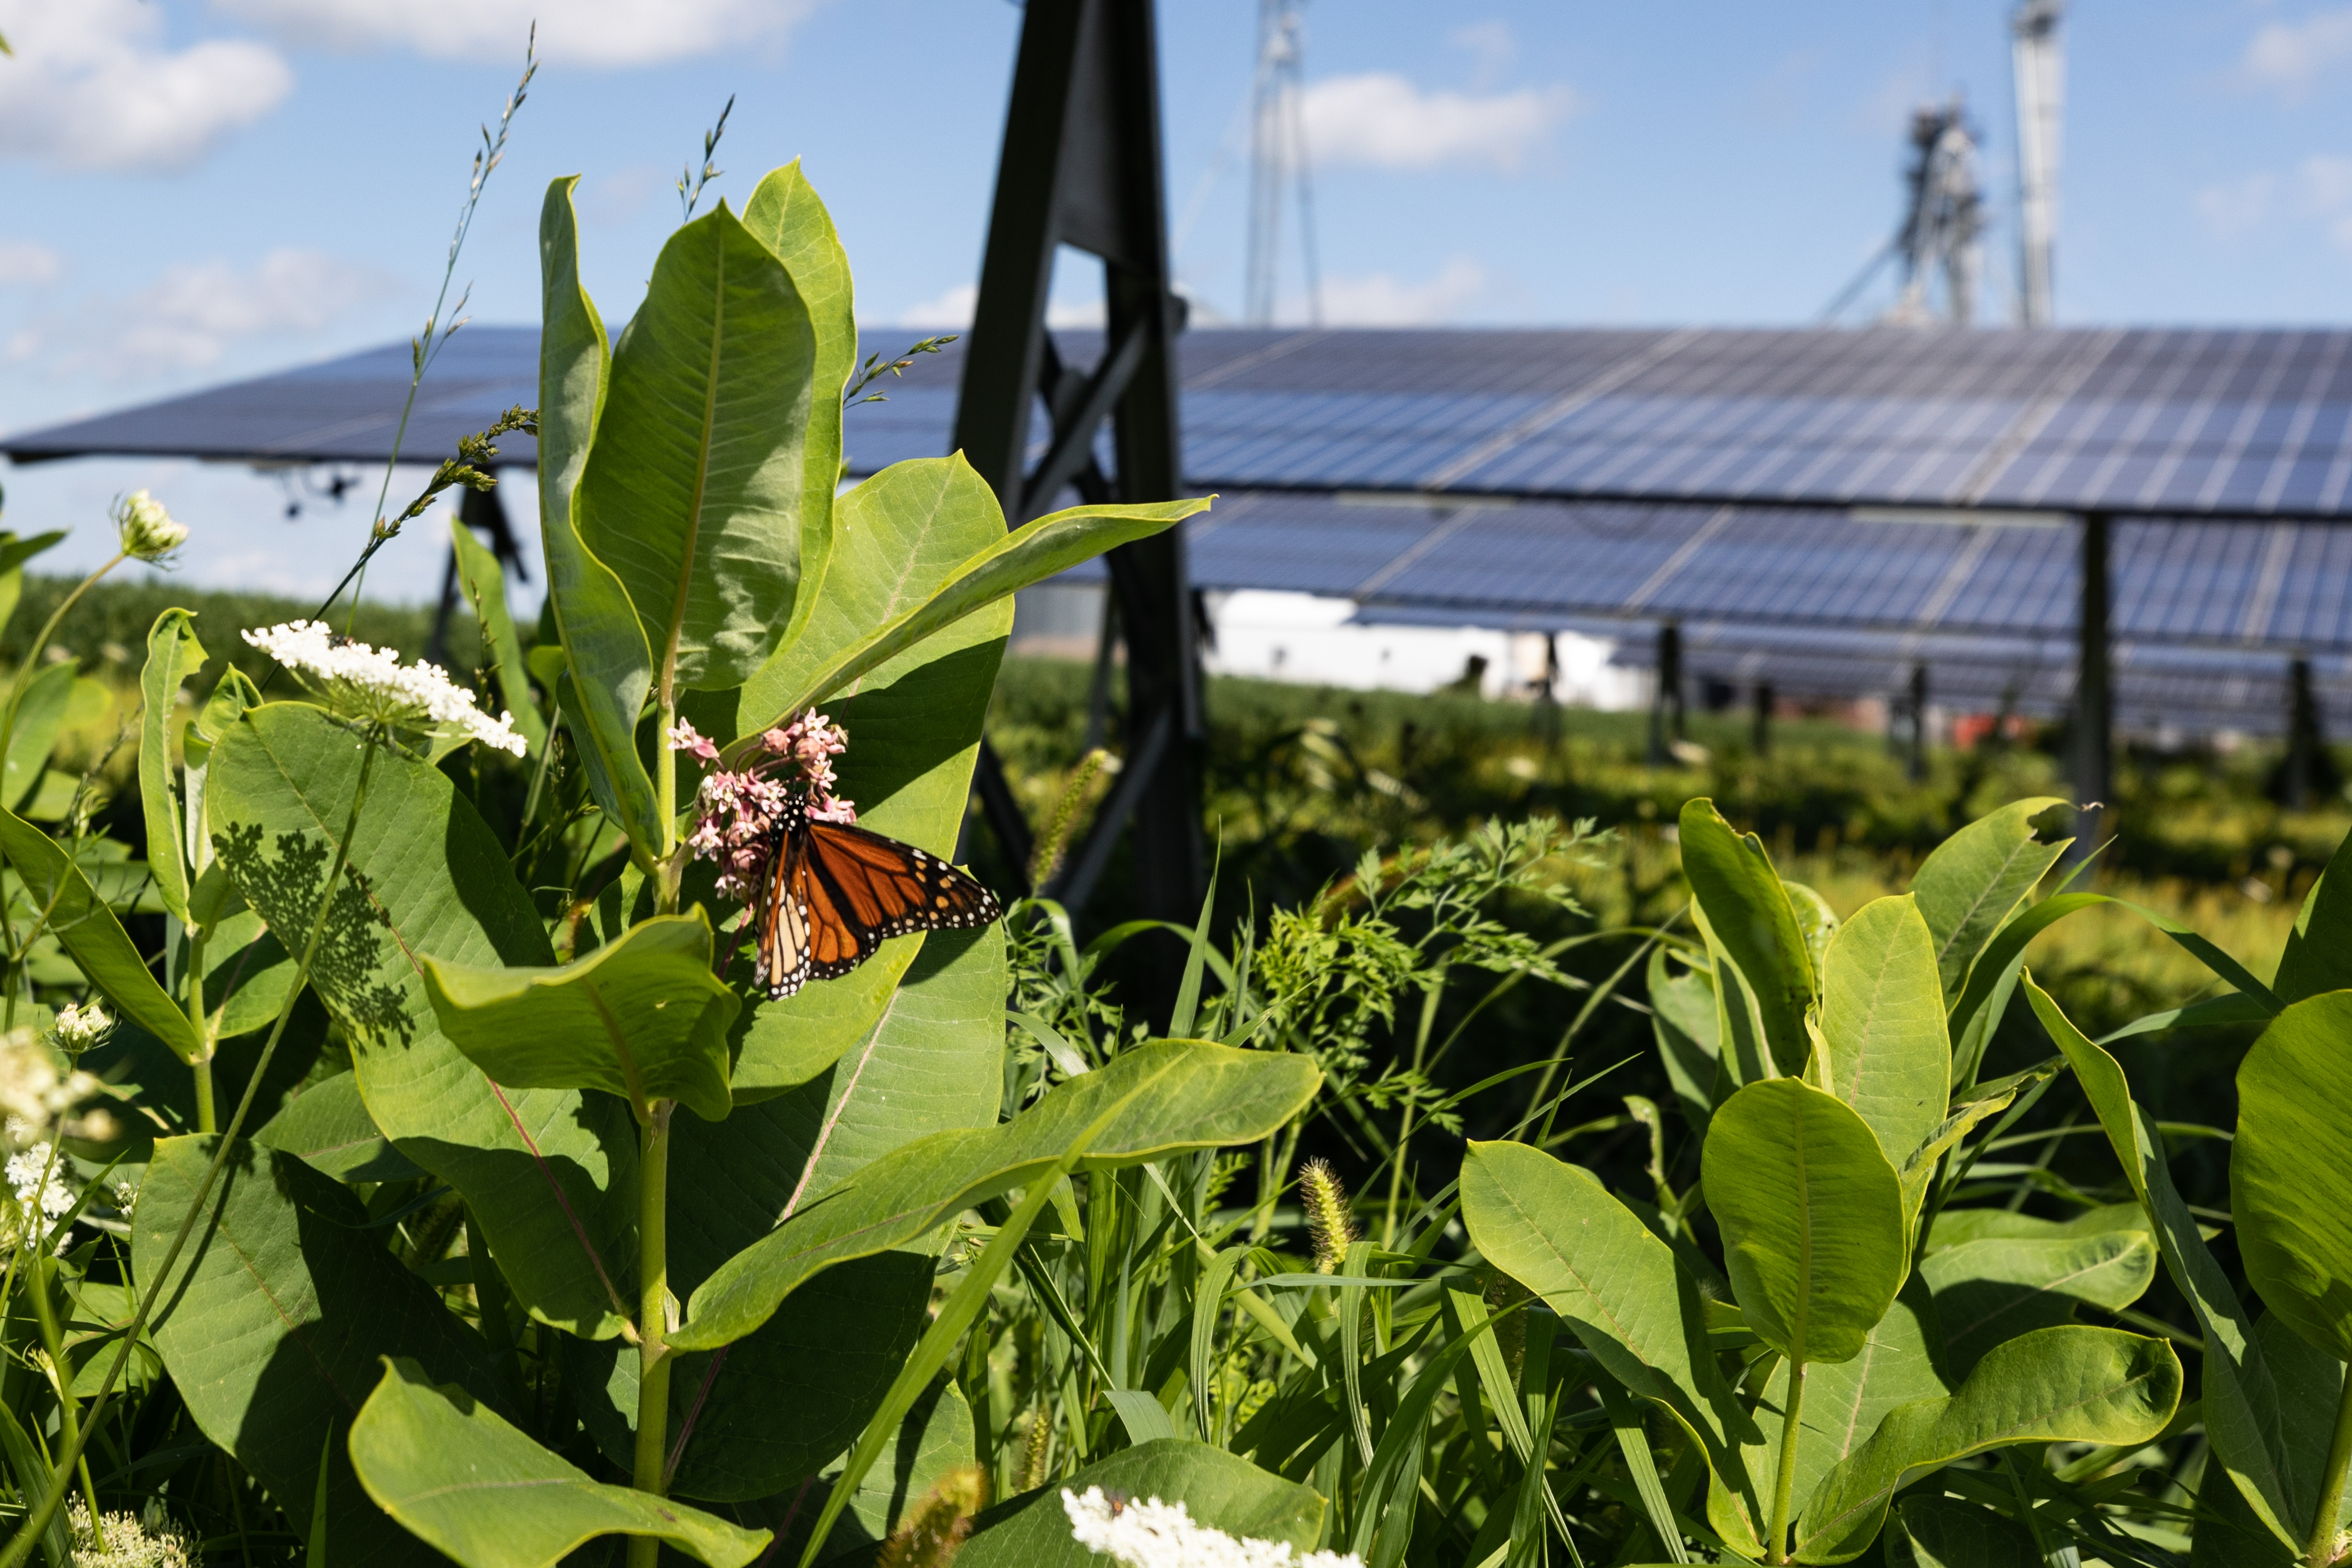 A pollinator-friendly solar field with an orange-and-black butterfly perched on a plant in the foreground and an array of solar panels in the background.